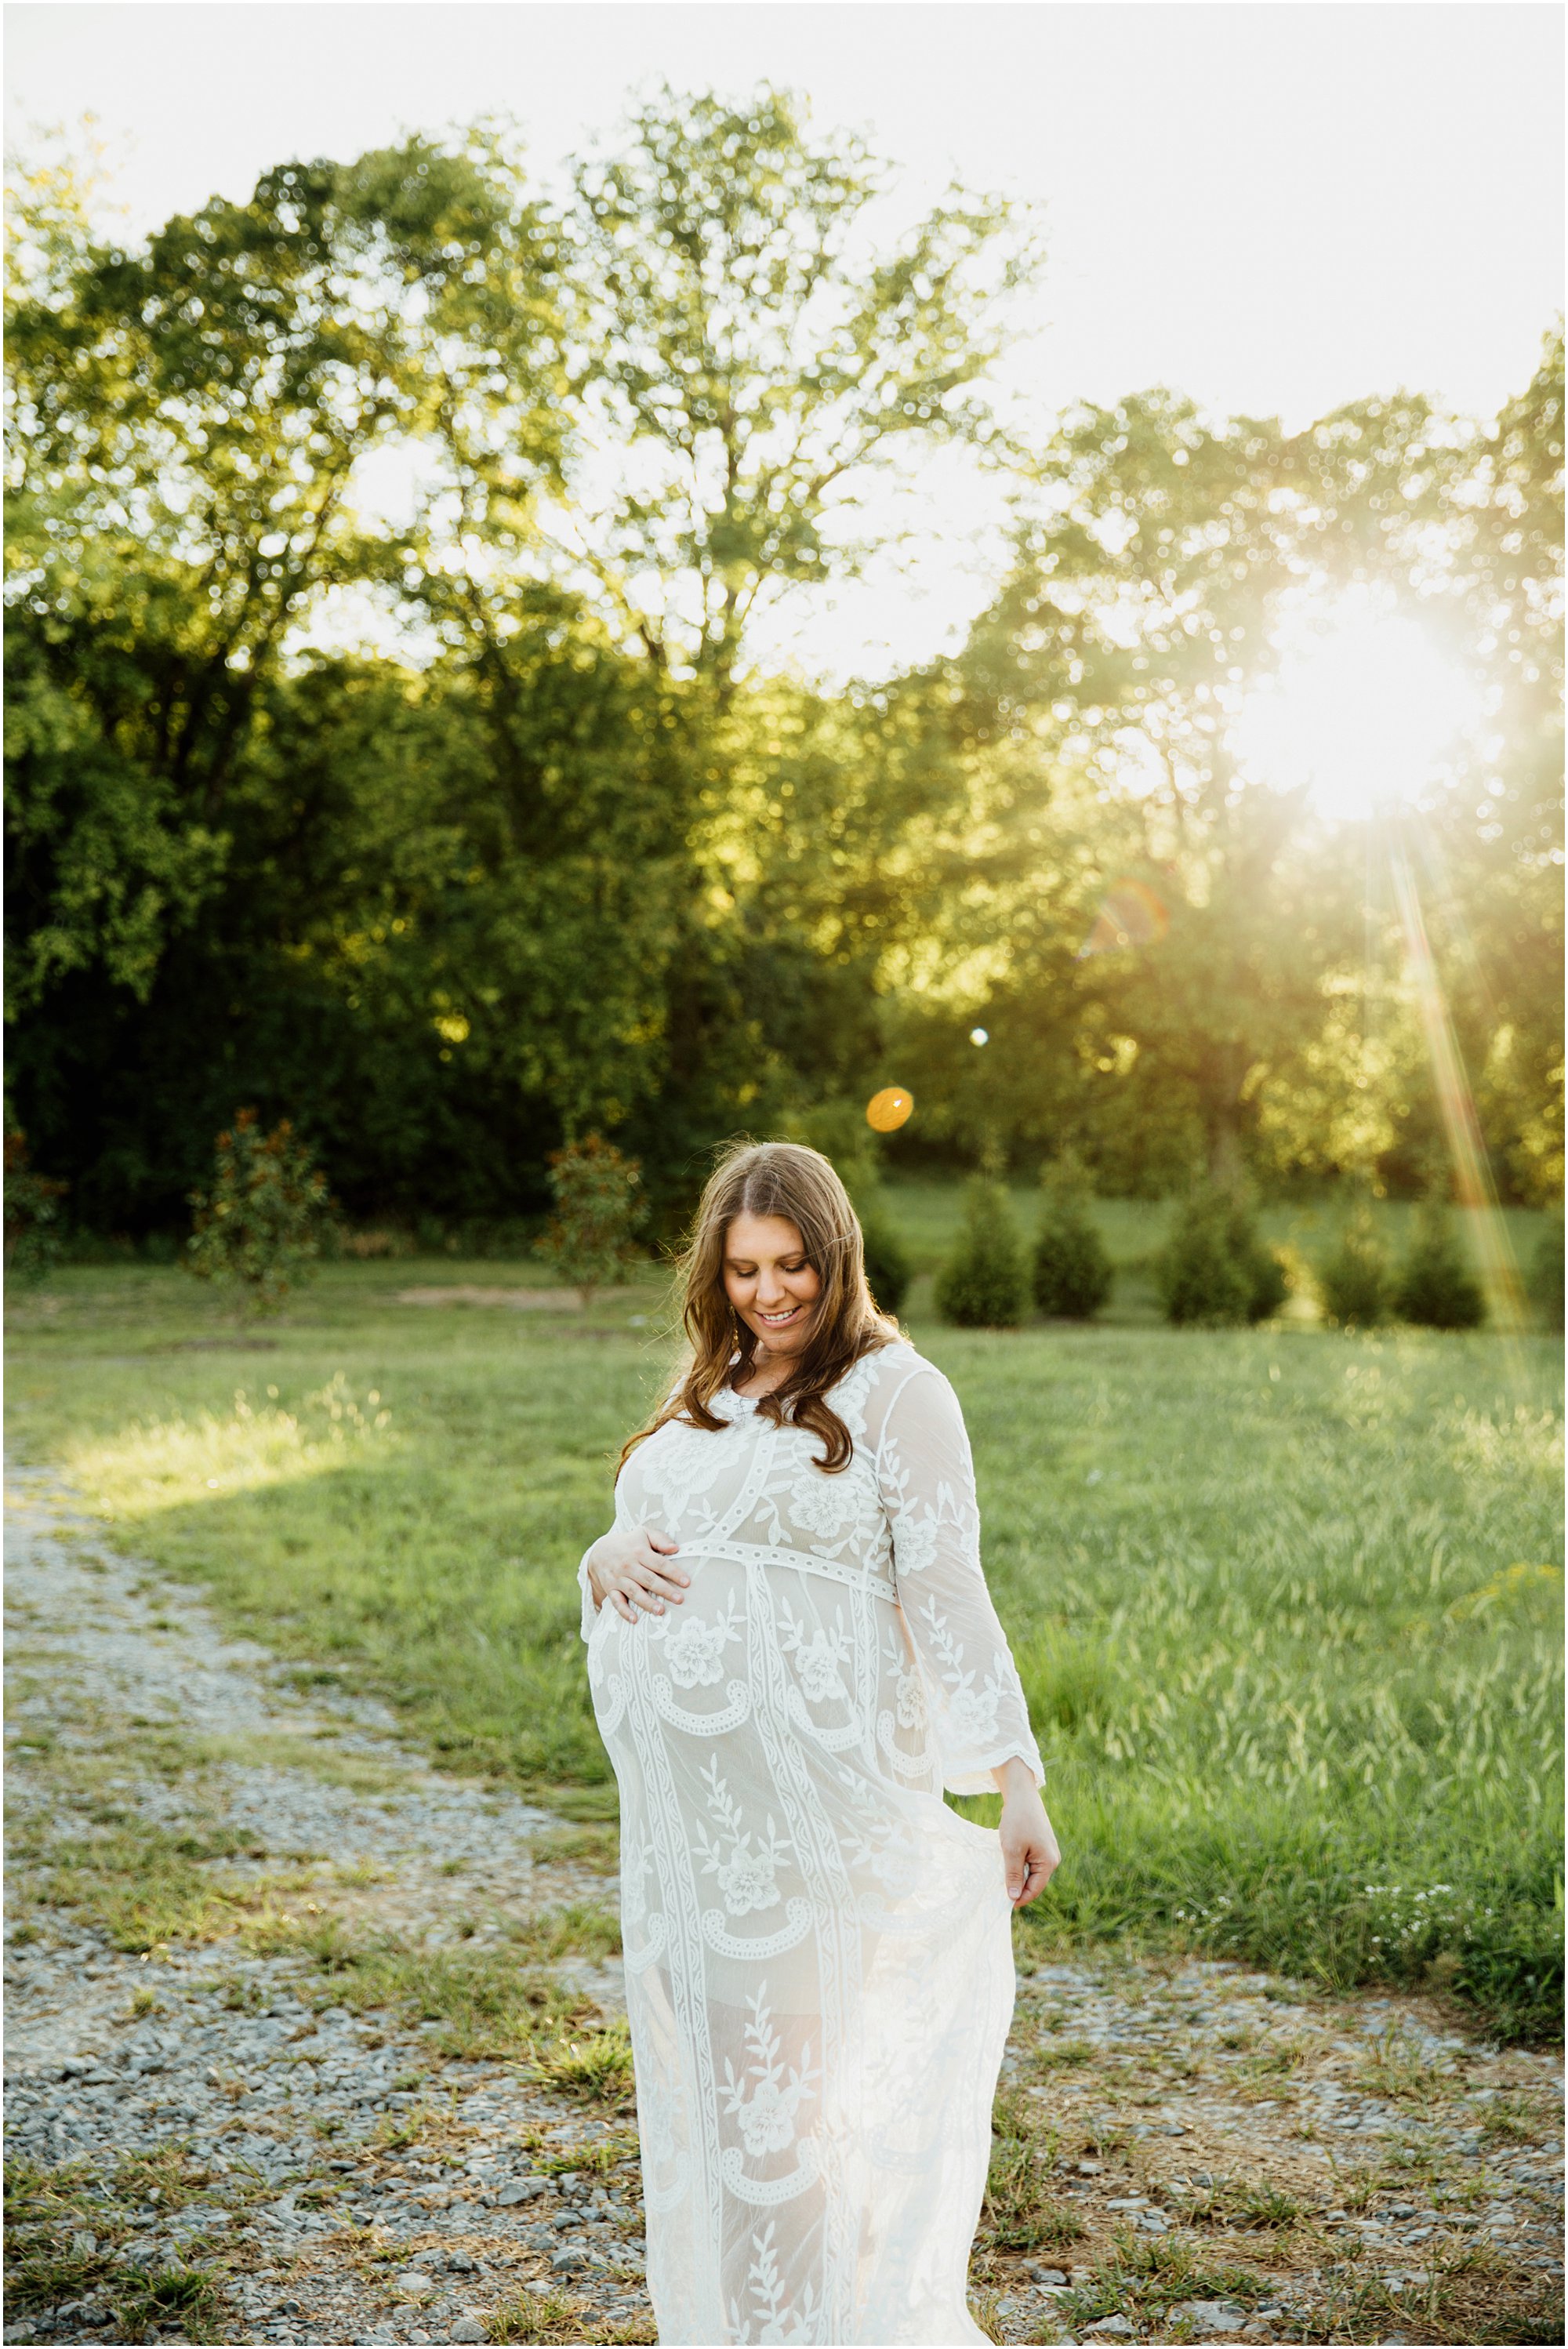 Maternity Photography with the Meyer Family in Brentwood, TN | Sara ...